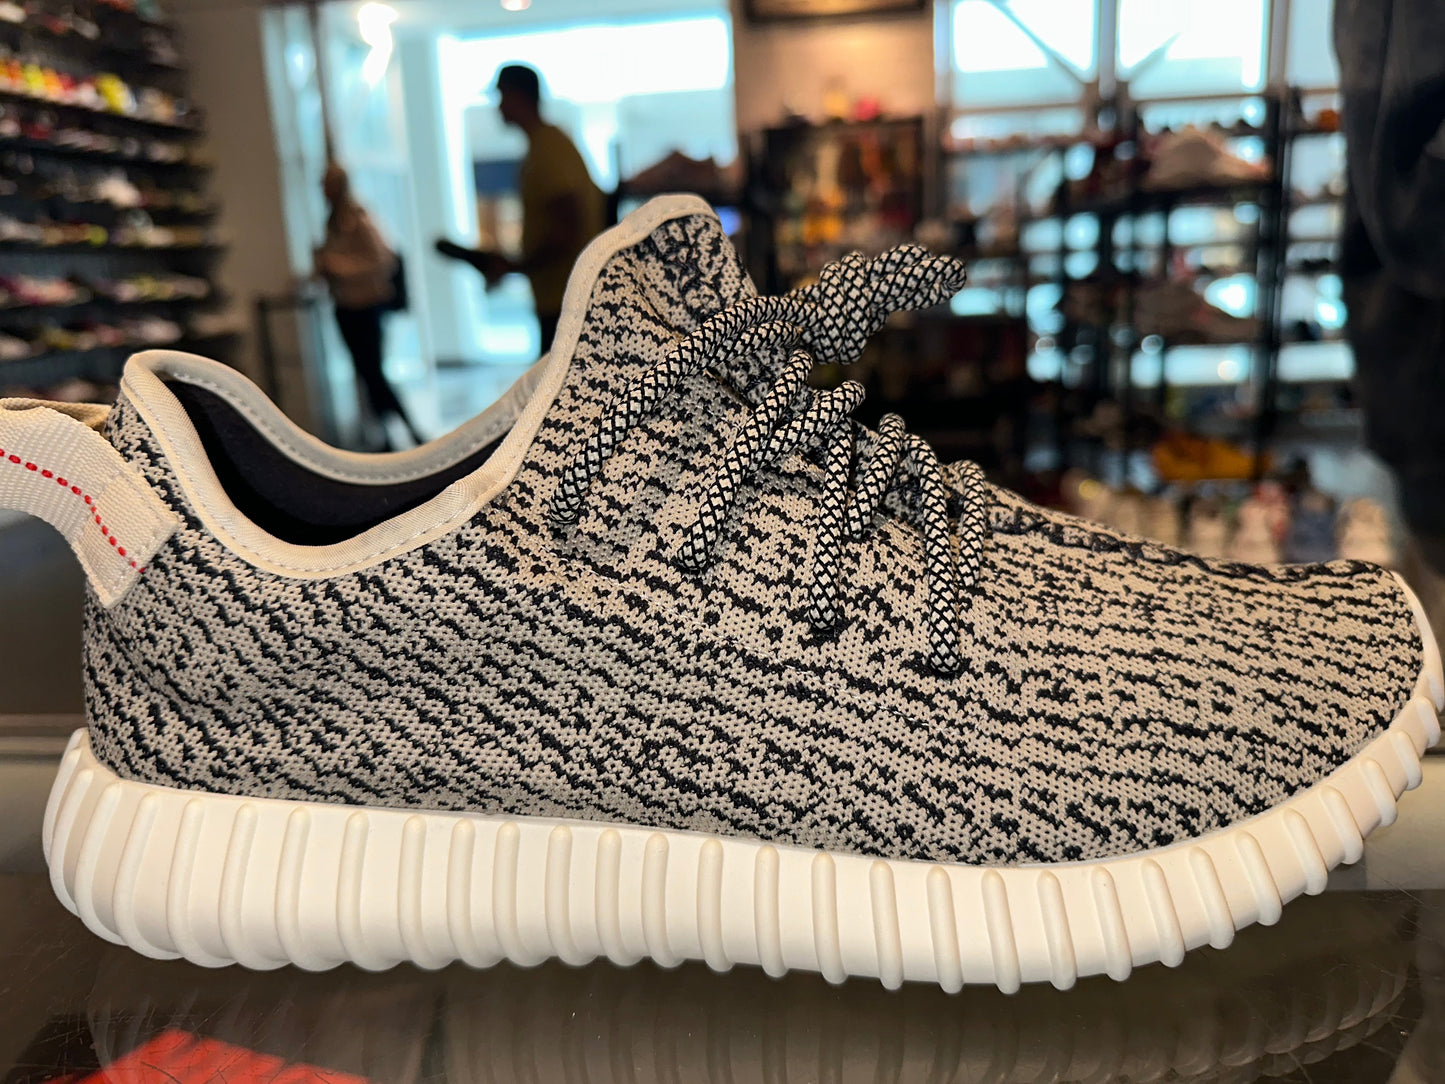 Size 9 Adidas Yeezy Boost 350 “Turtle Dove” Brand New (Mall)